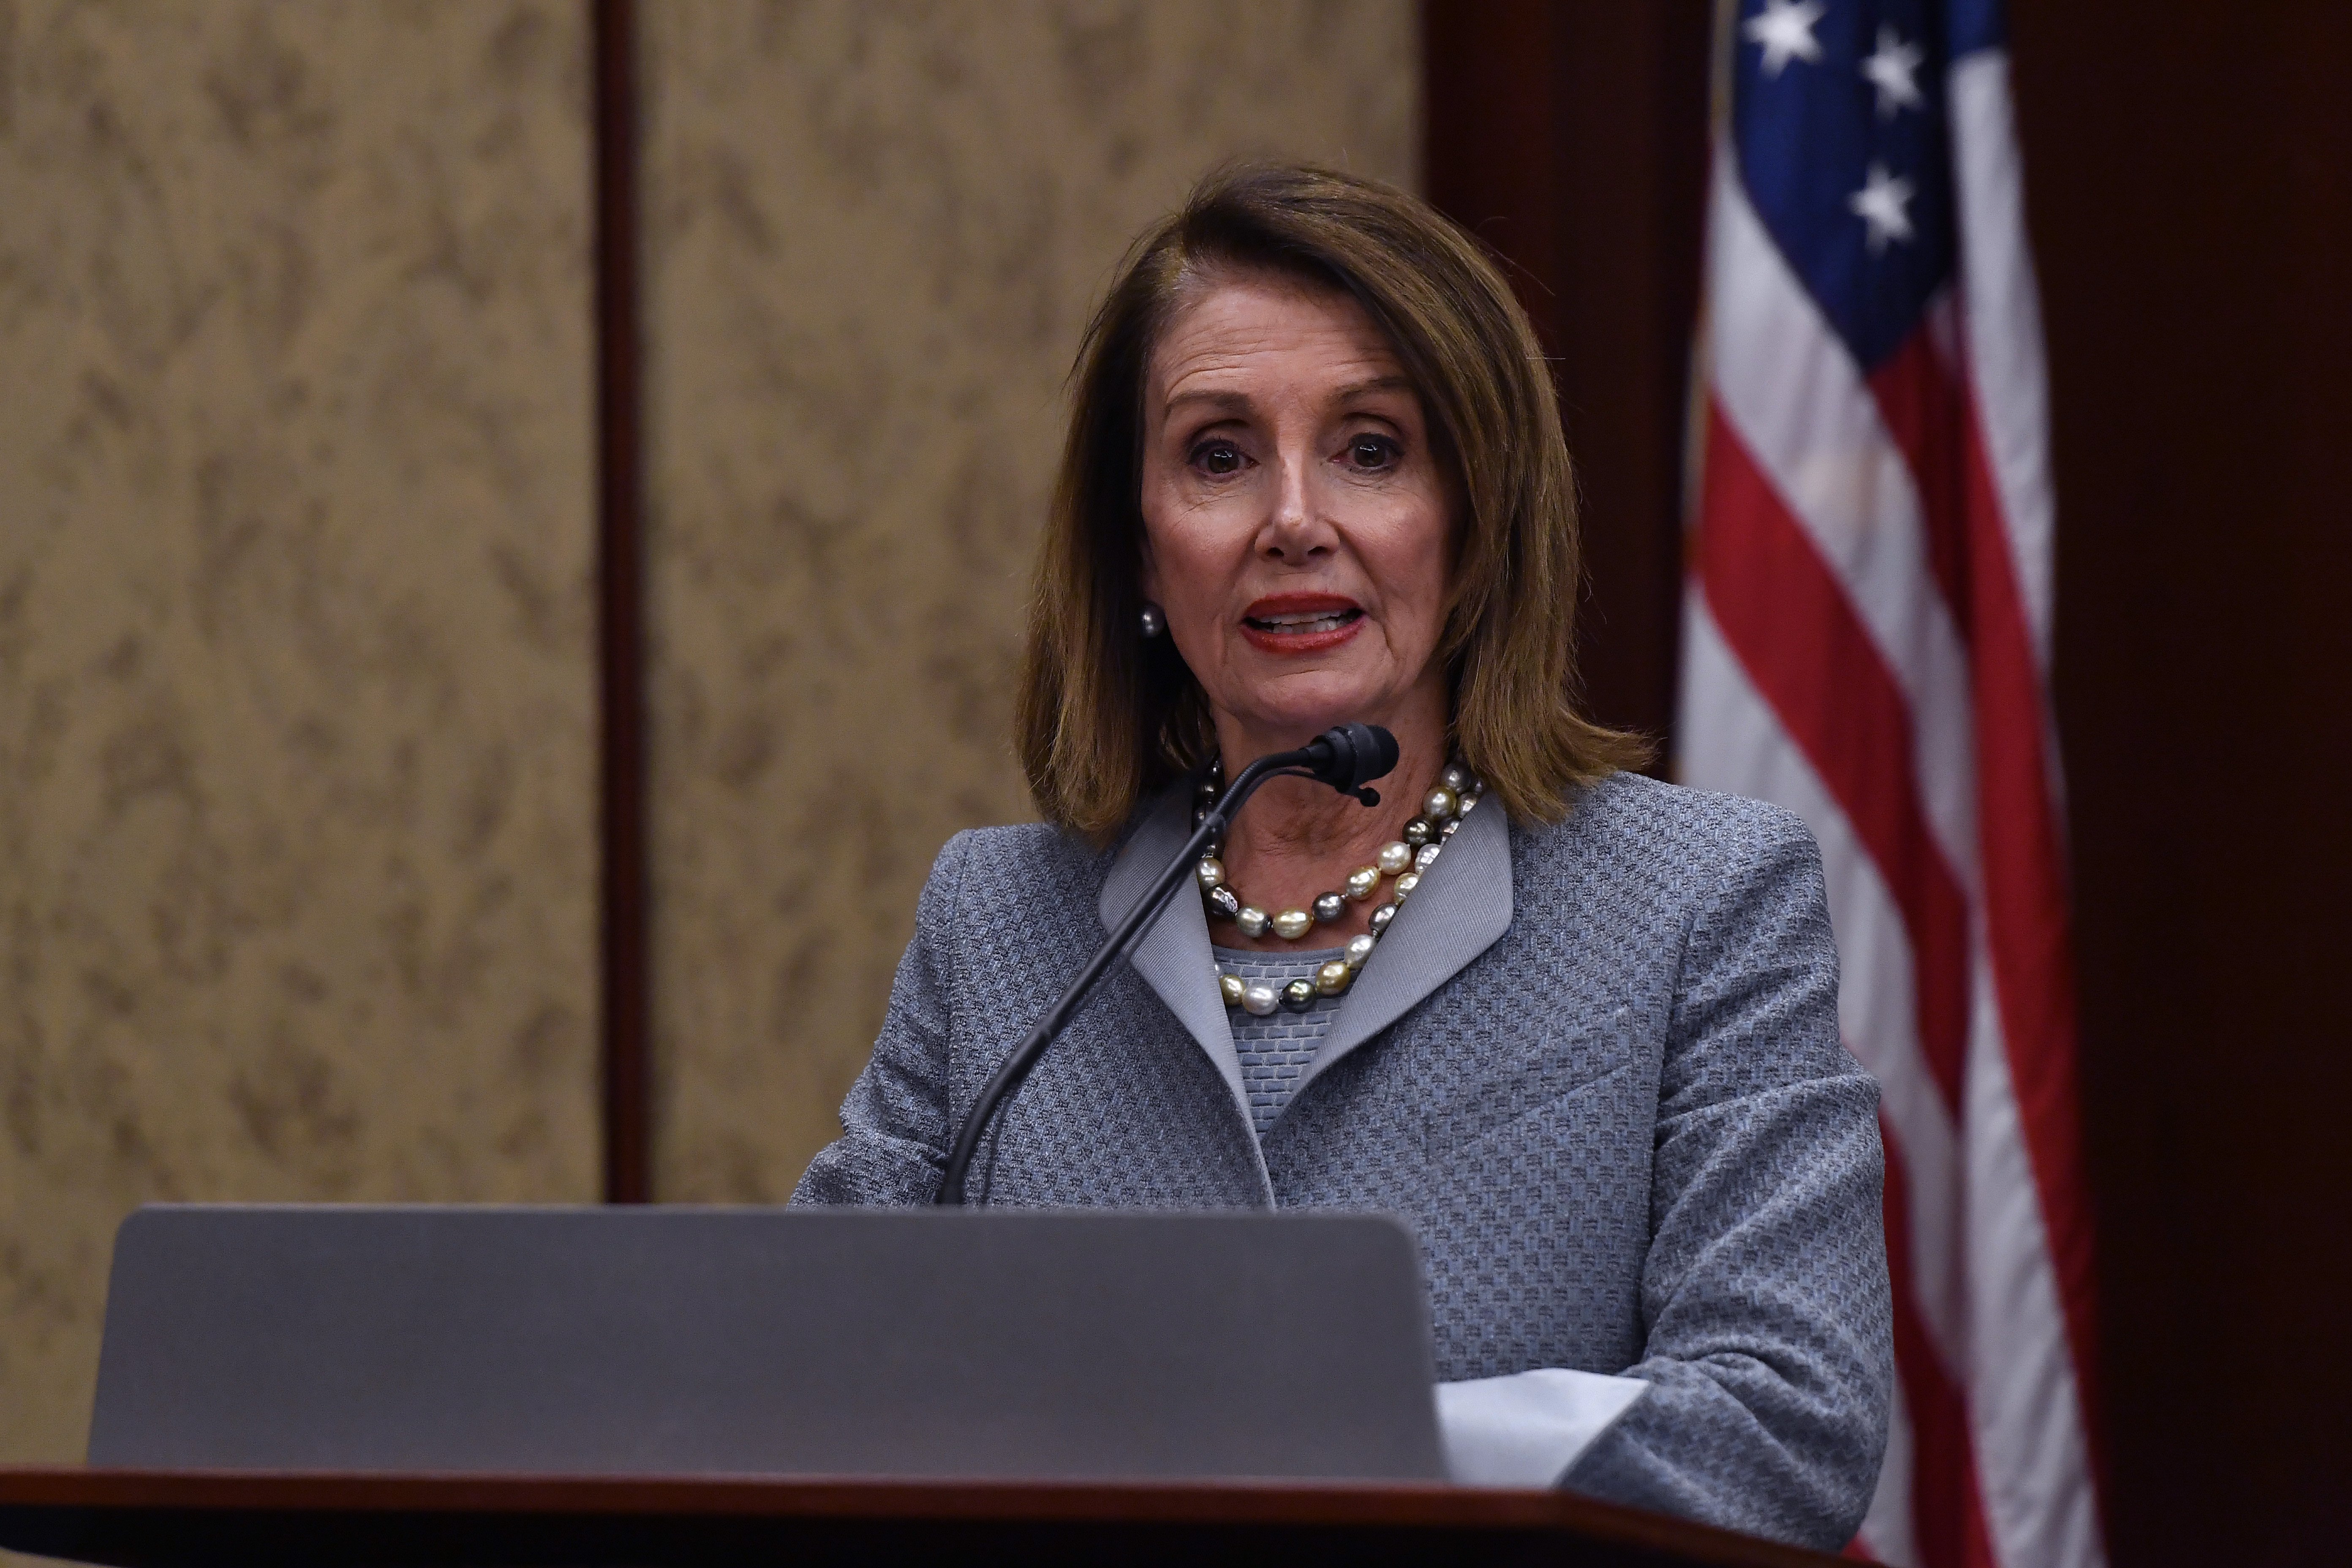 House Speaker Nancy Pelosi delivering a speech at the screening of TransMilitary on Capitol Hill | Photo: Getty Images